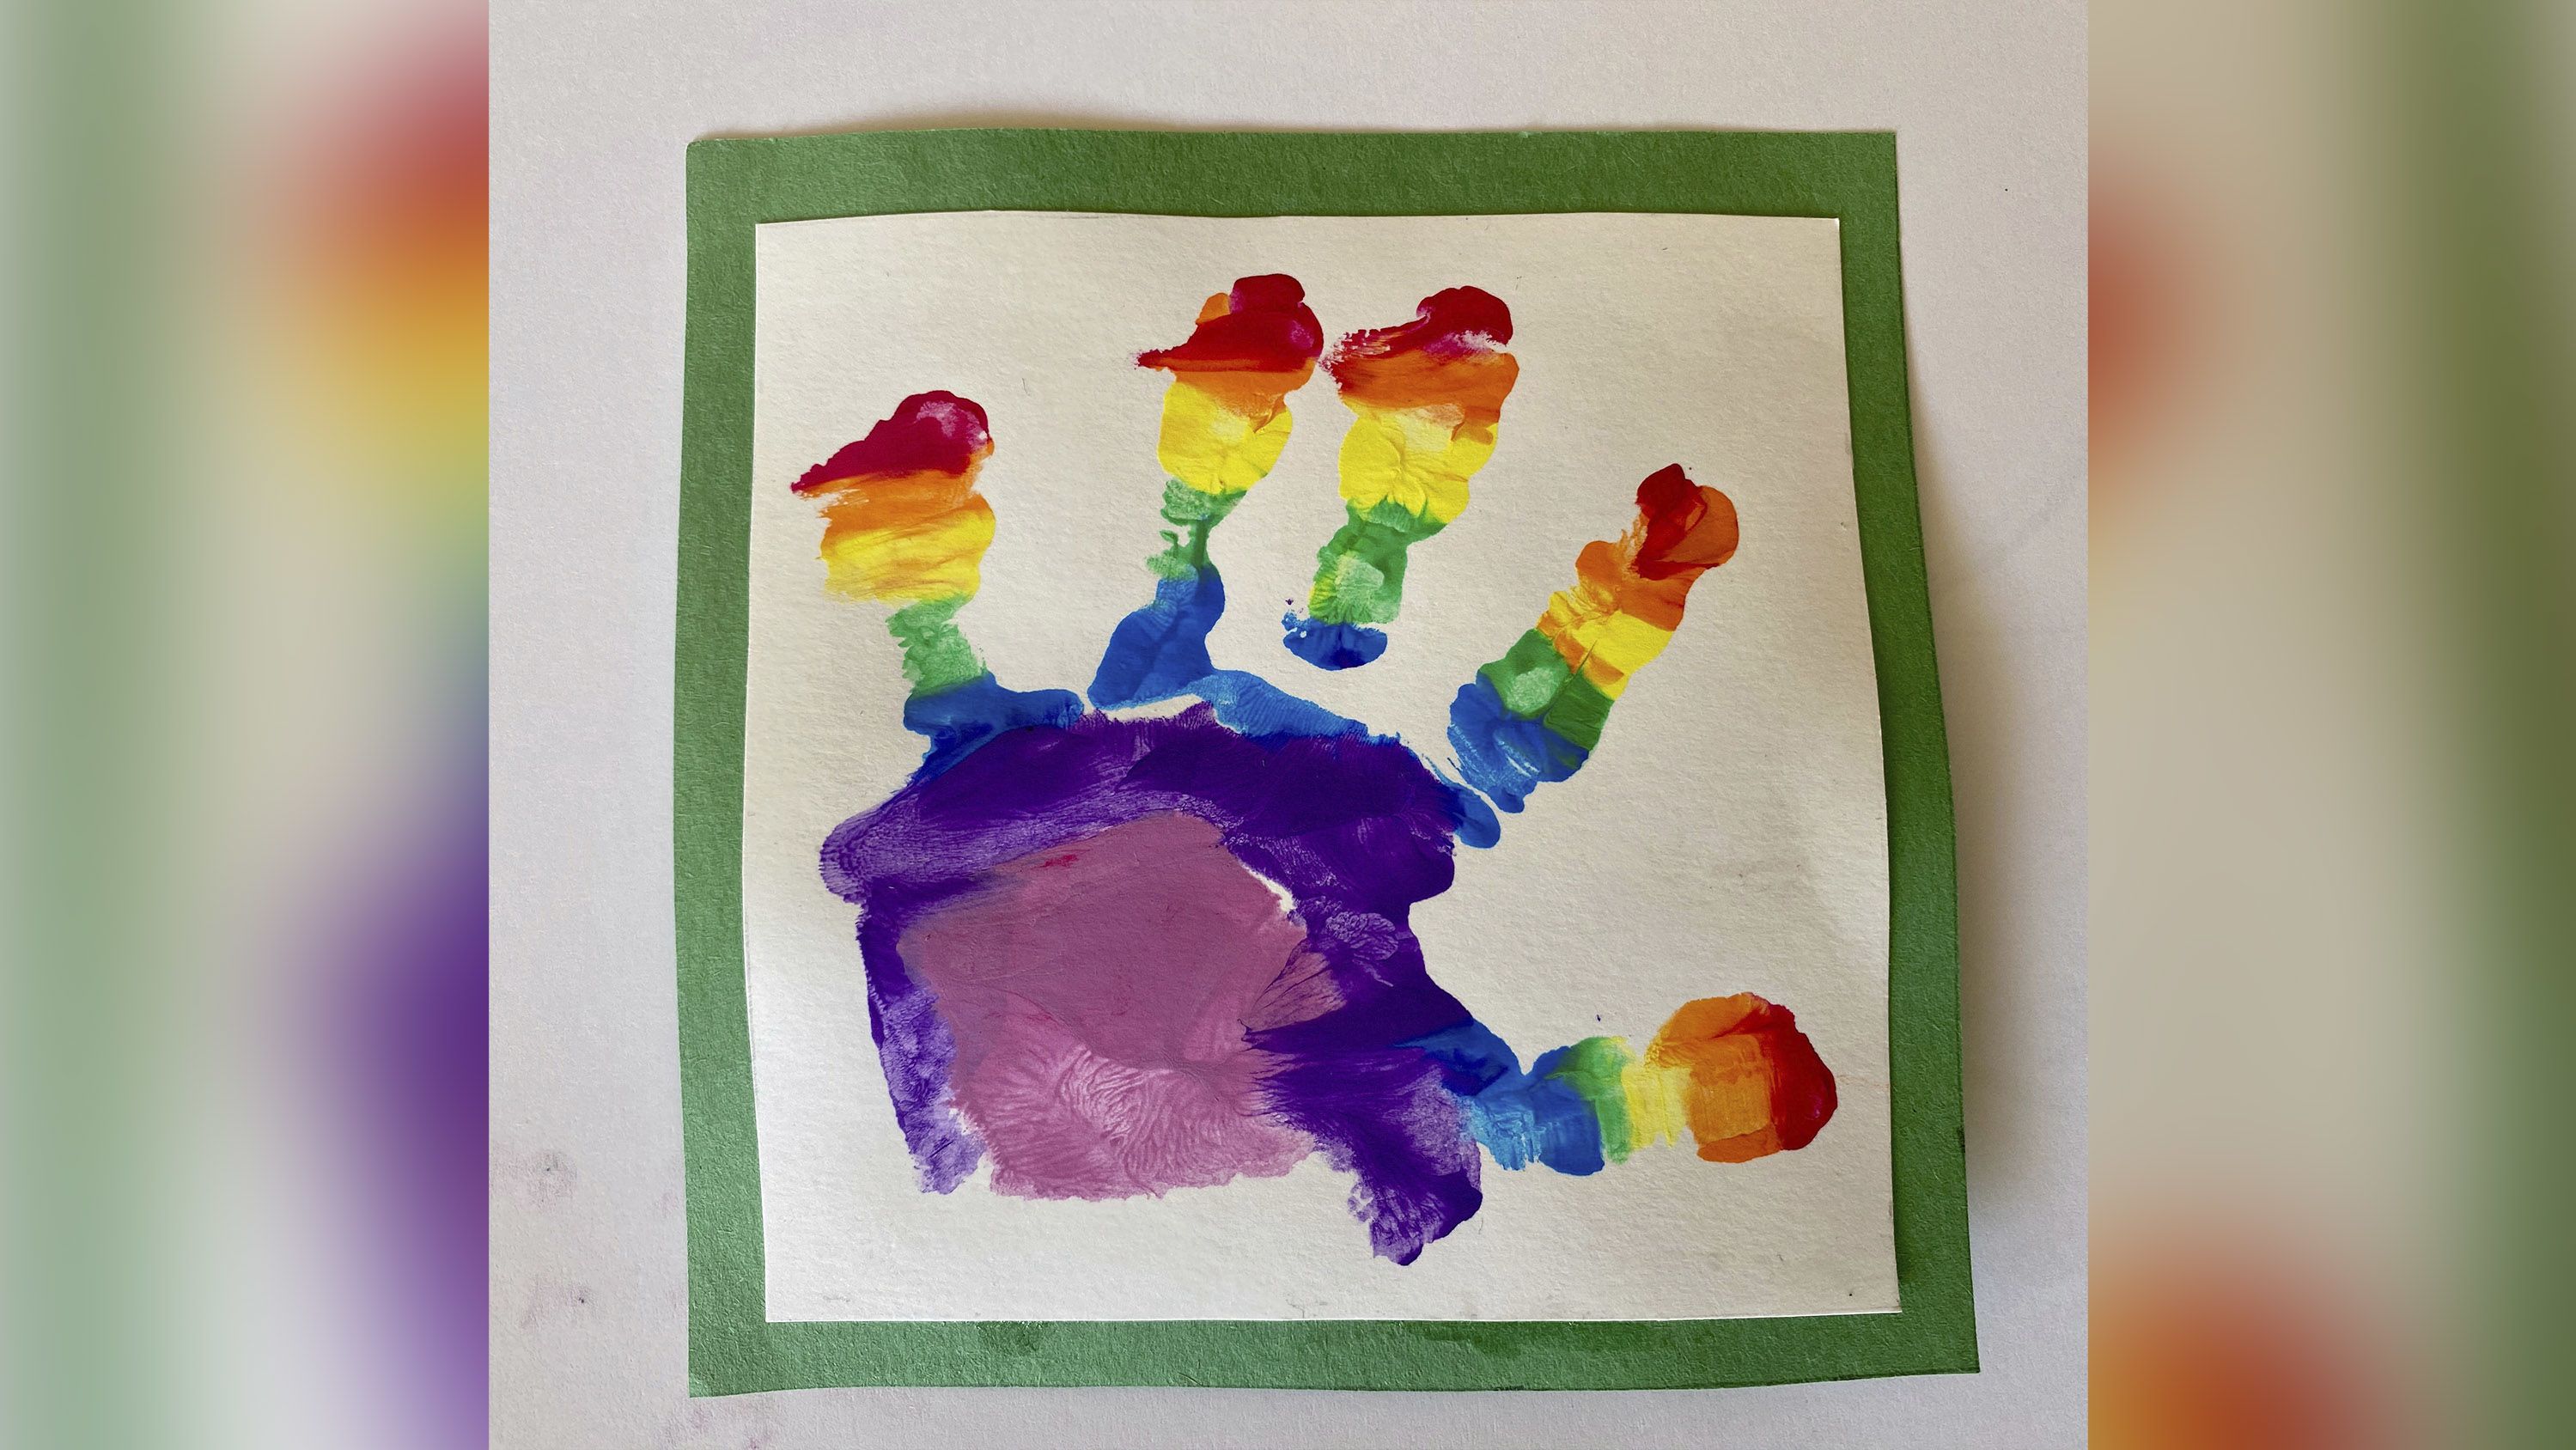 Prince Louis painted his own rainbow picture, using a hand print. 